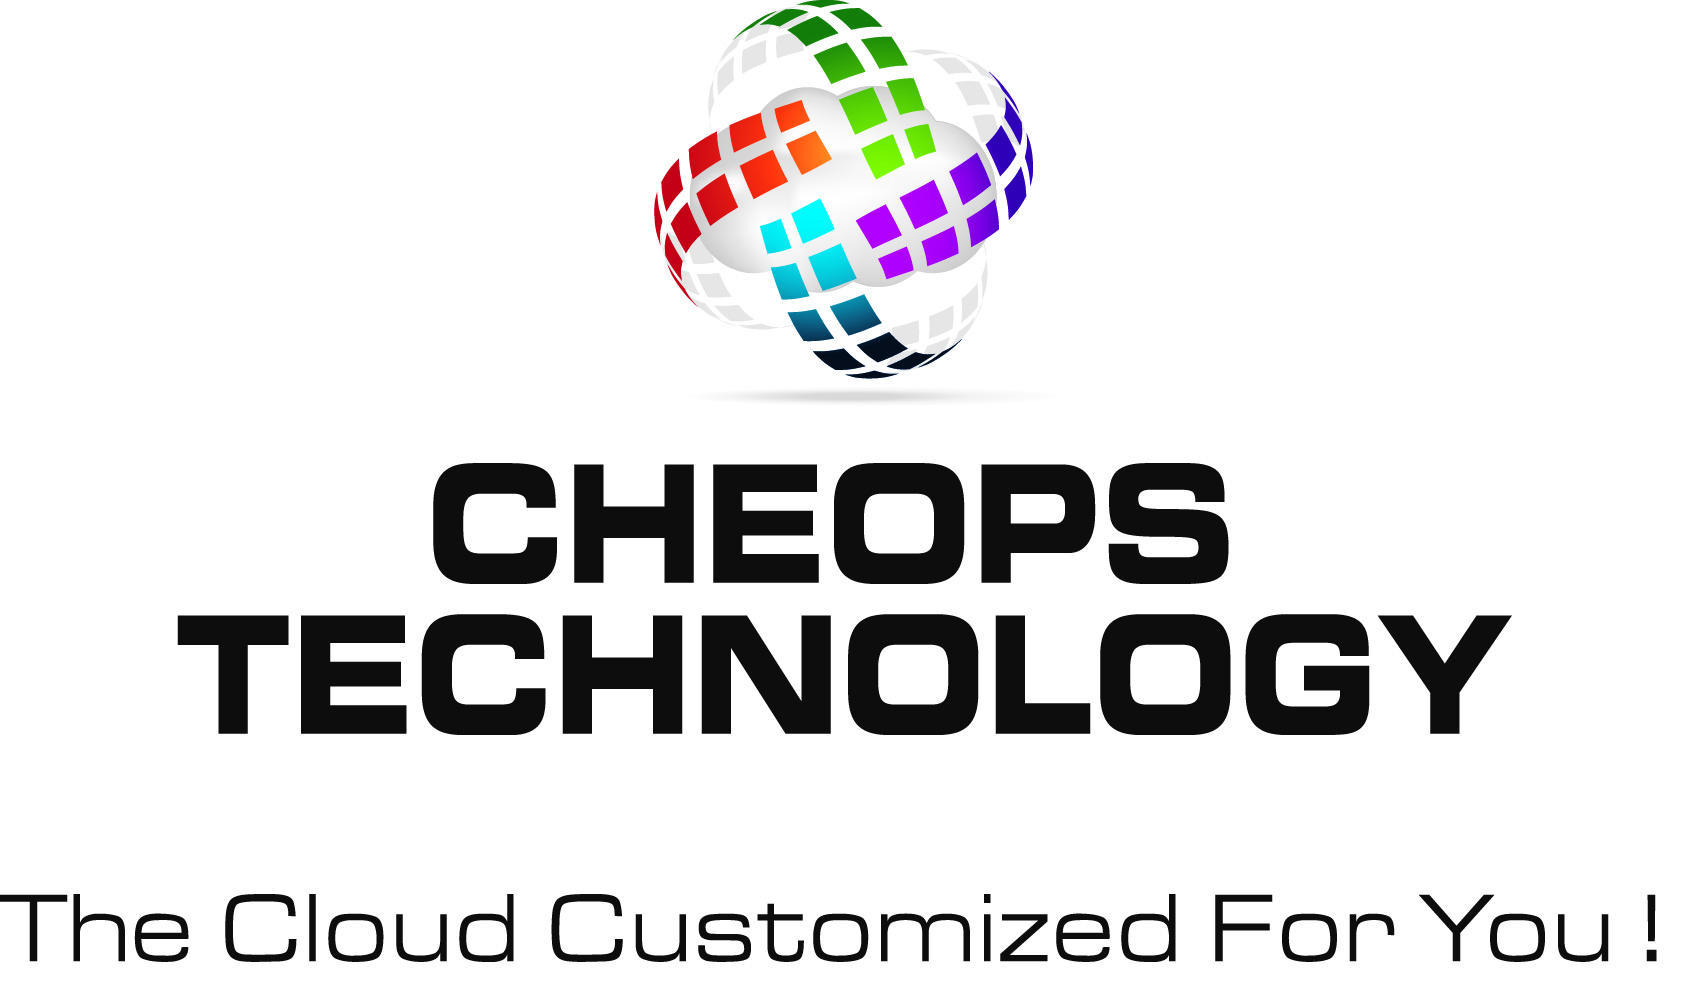 CHEOPS TECHNOLOGY ou